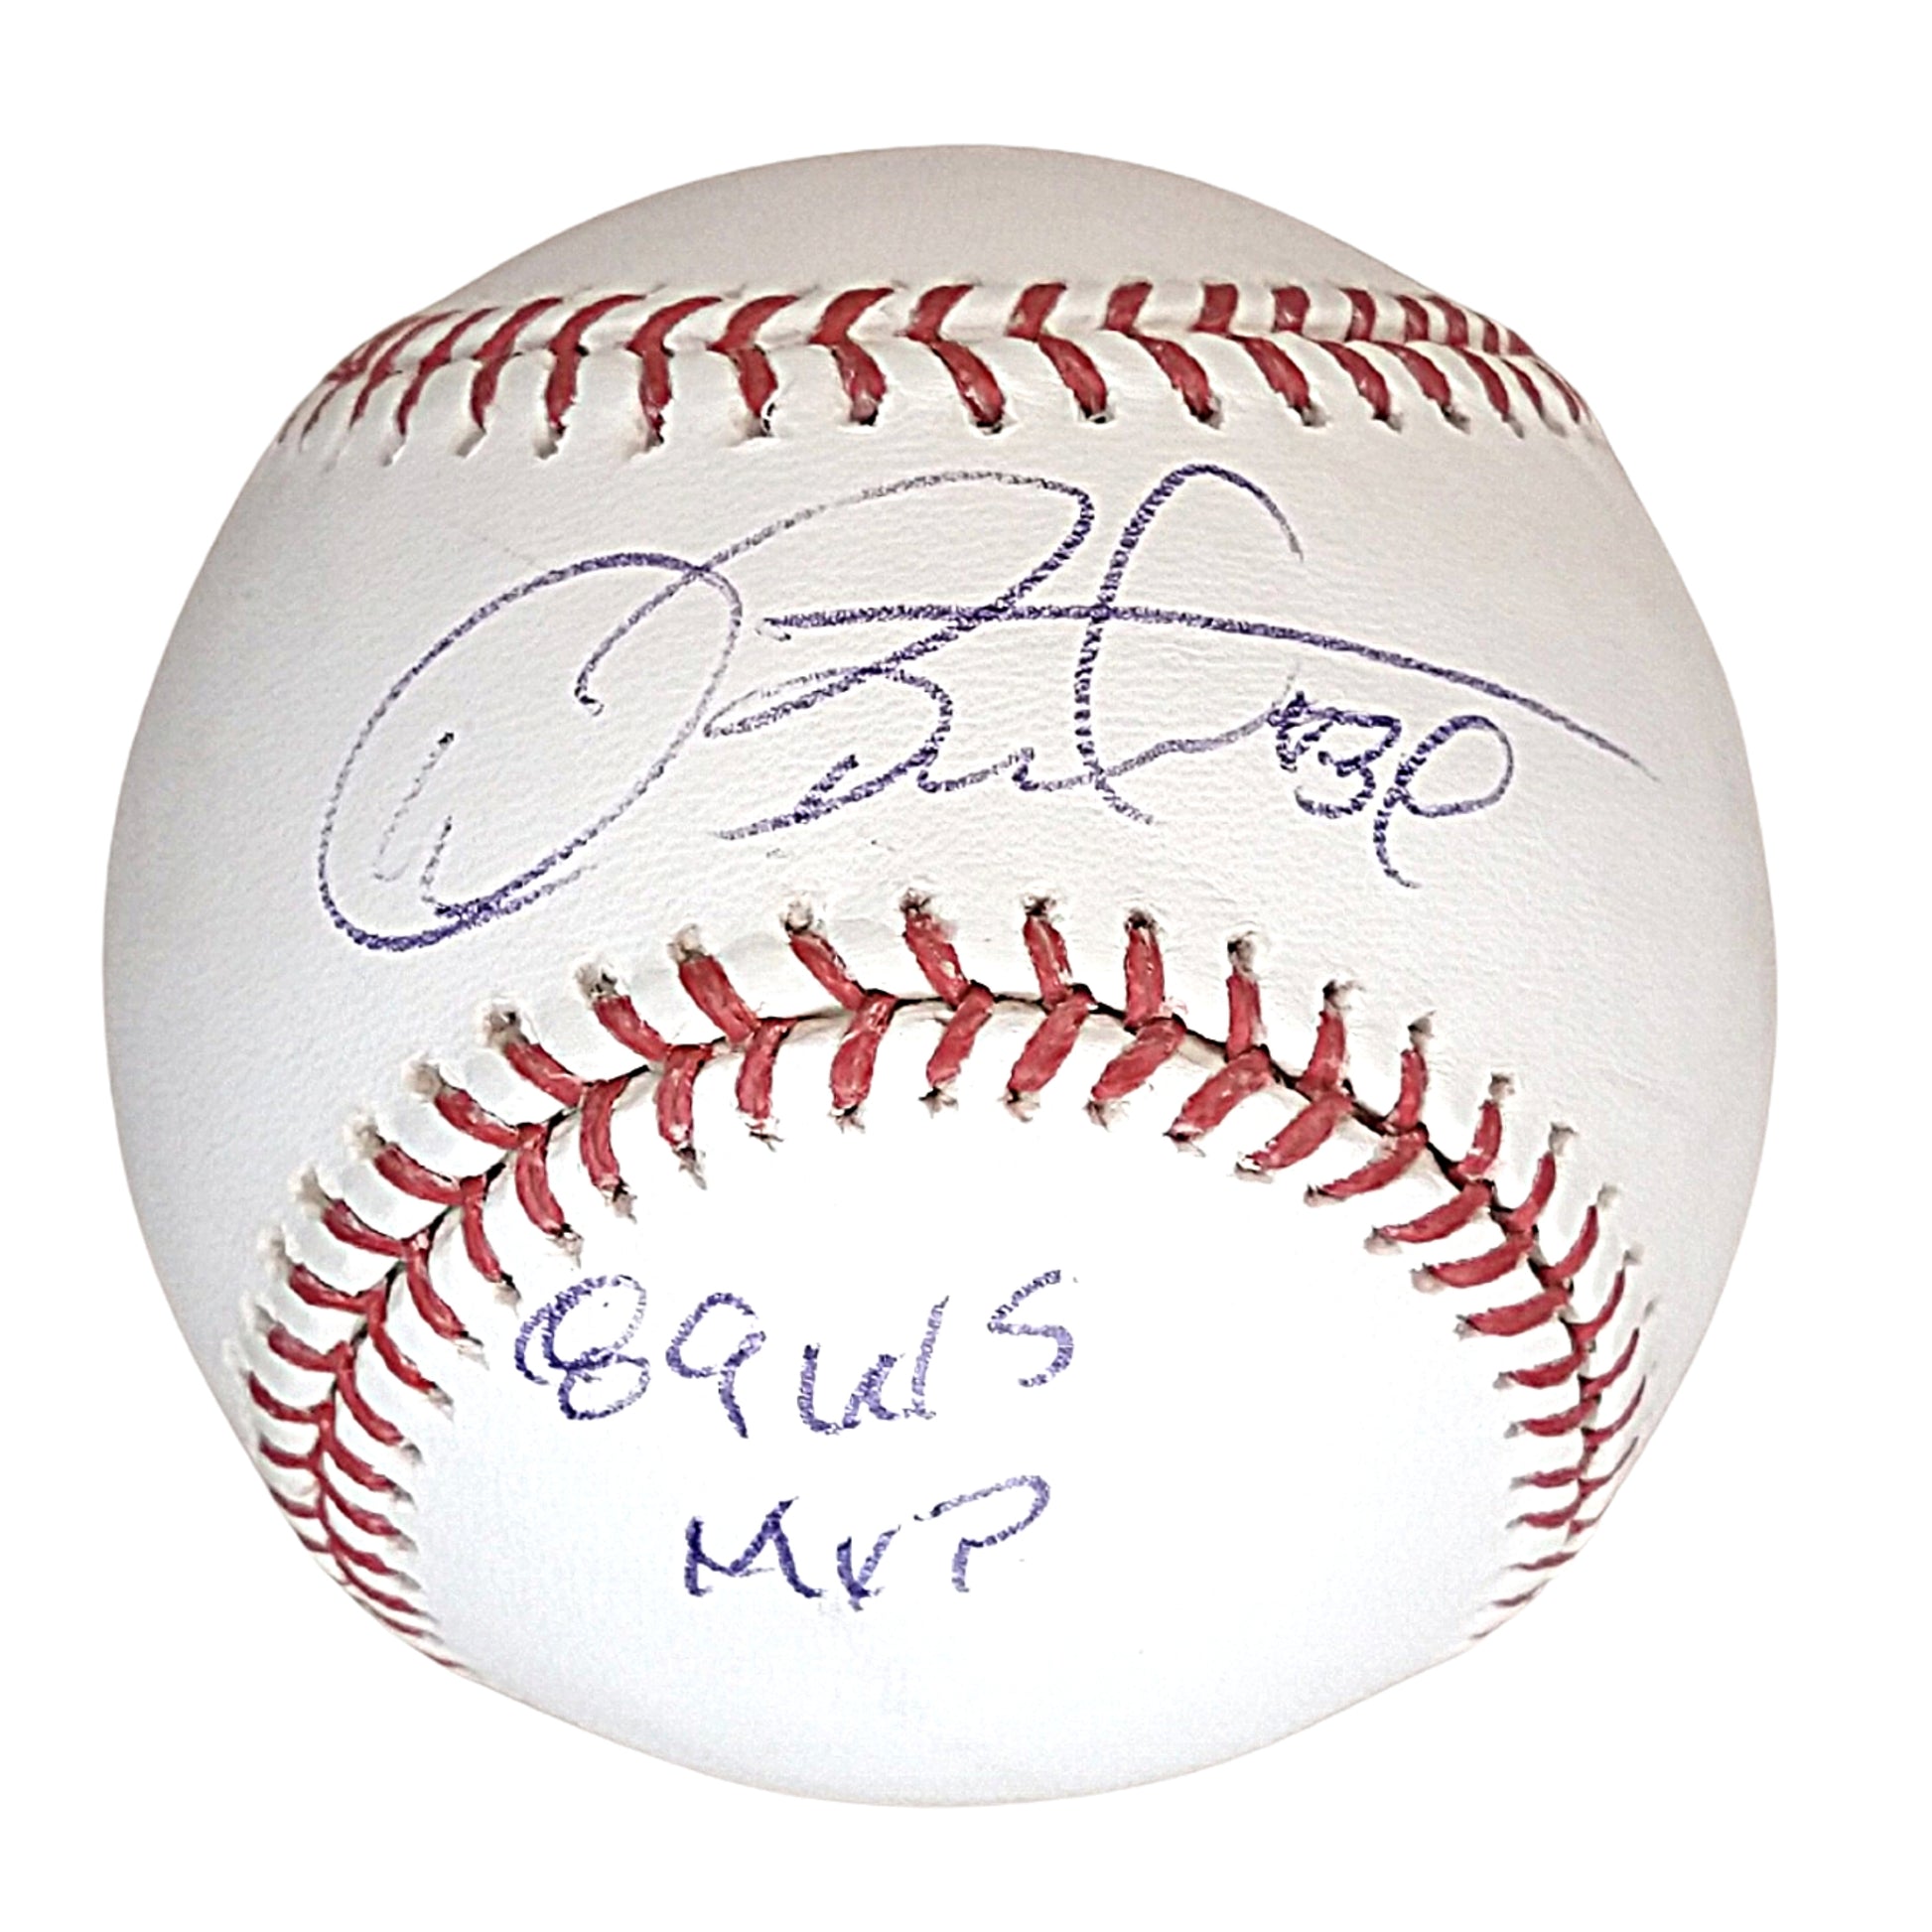 Baseballs- Autographed- Dave Stewart Signed Rawlings ROMLB Official Major League Baseball with 1989 World Series MVP Inscription- Oakland Athletics A's- Beckett BAS Authentication 102